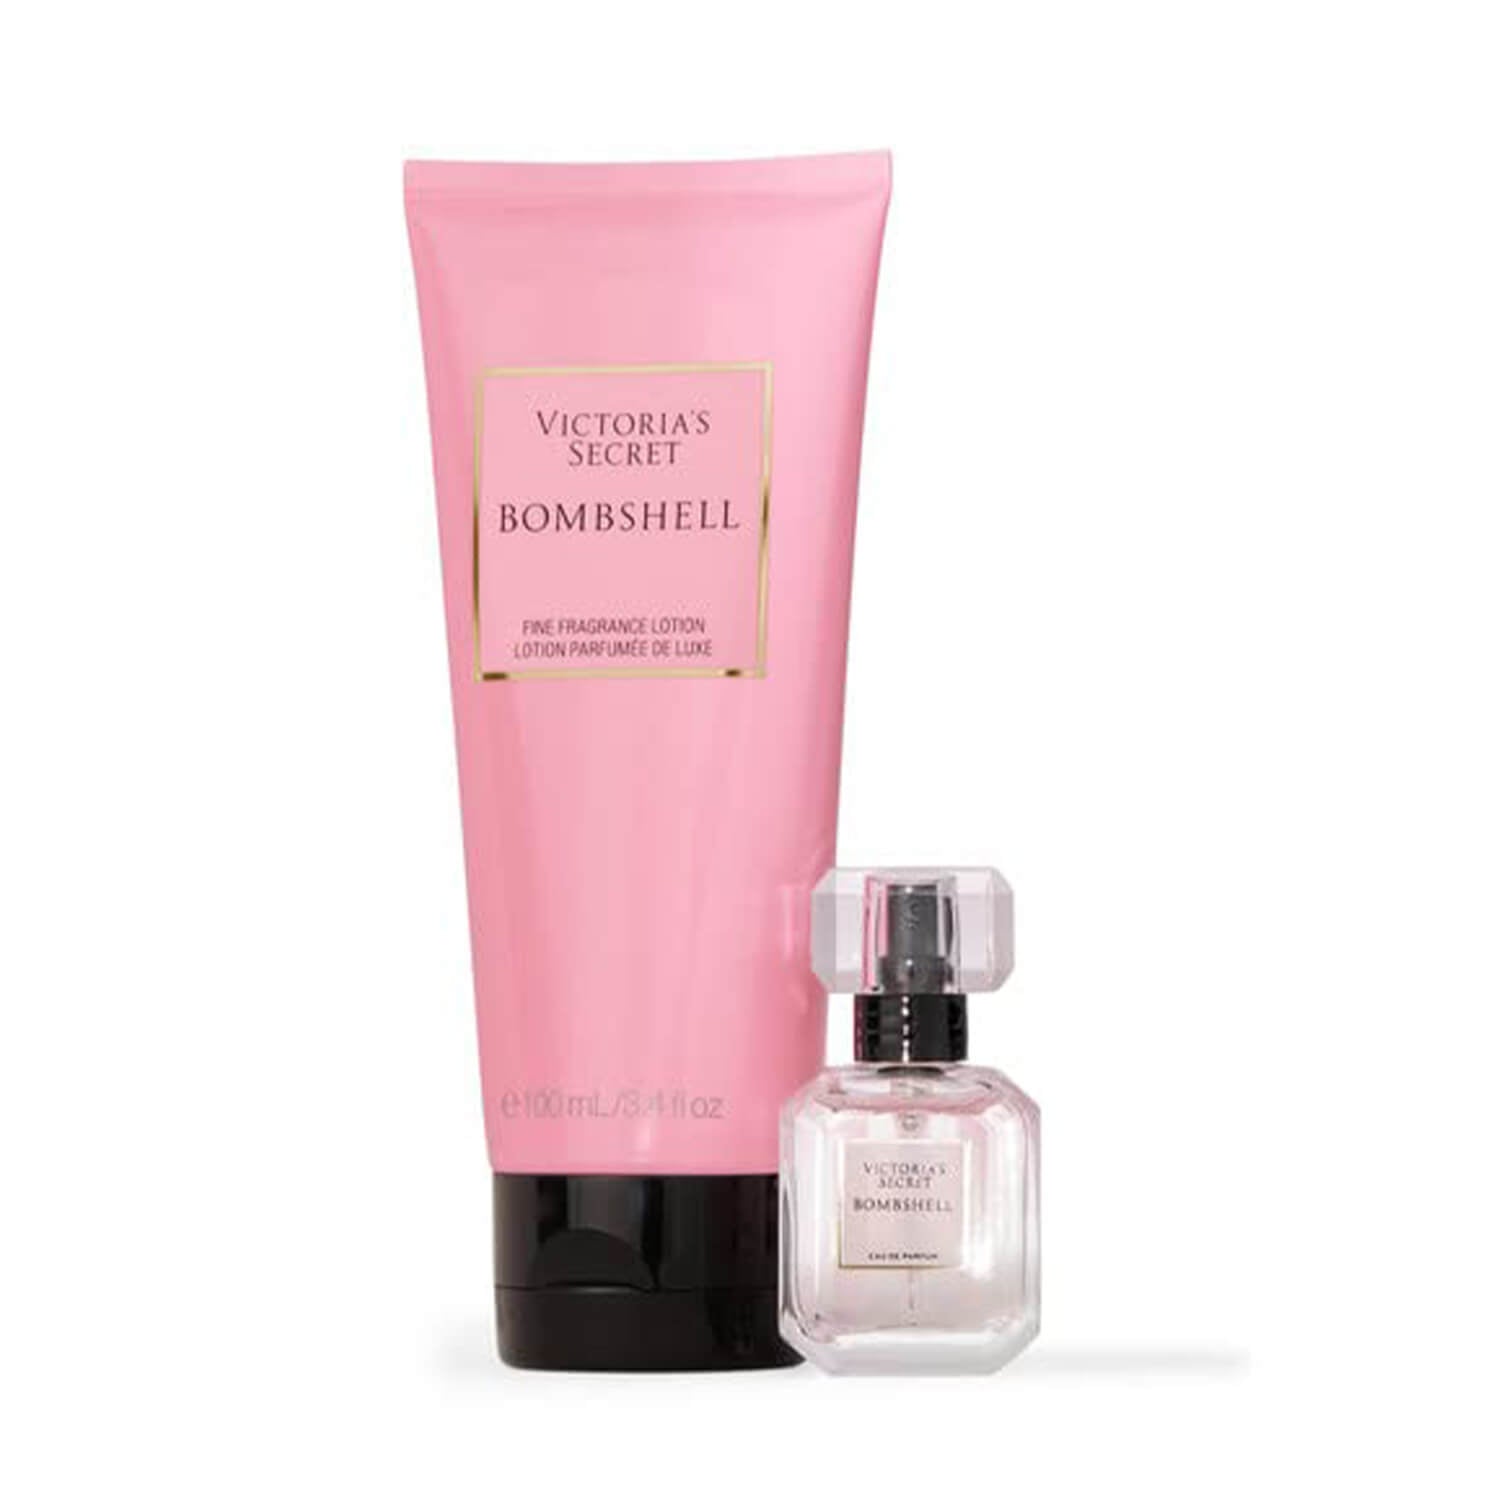 Shop 100% original Victoria's Secret Bombshell perfume and lotion duo gift set available at Heygirl.pk for delivery in Pakistan